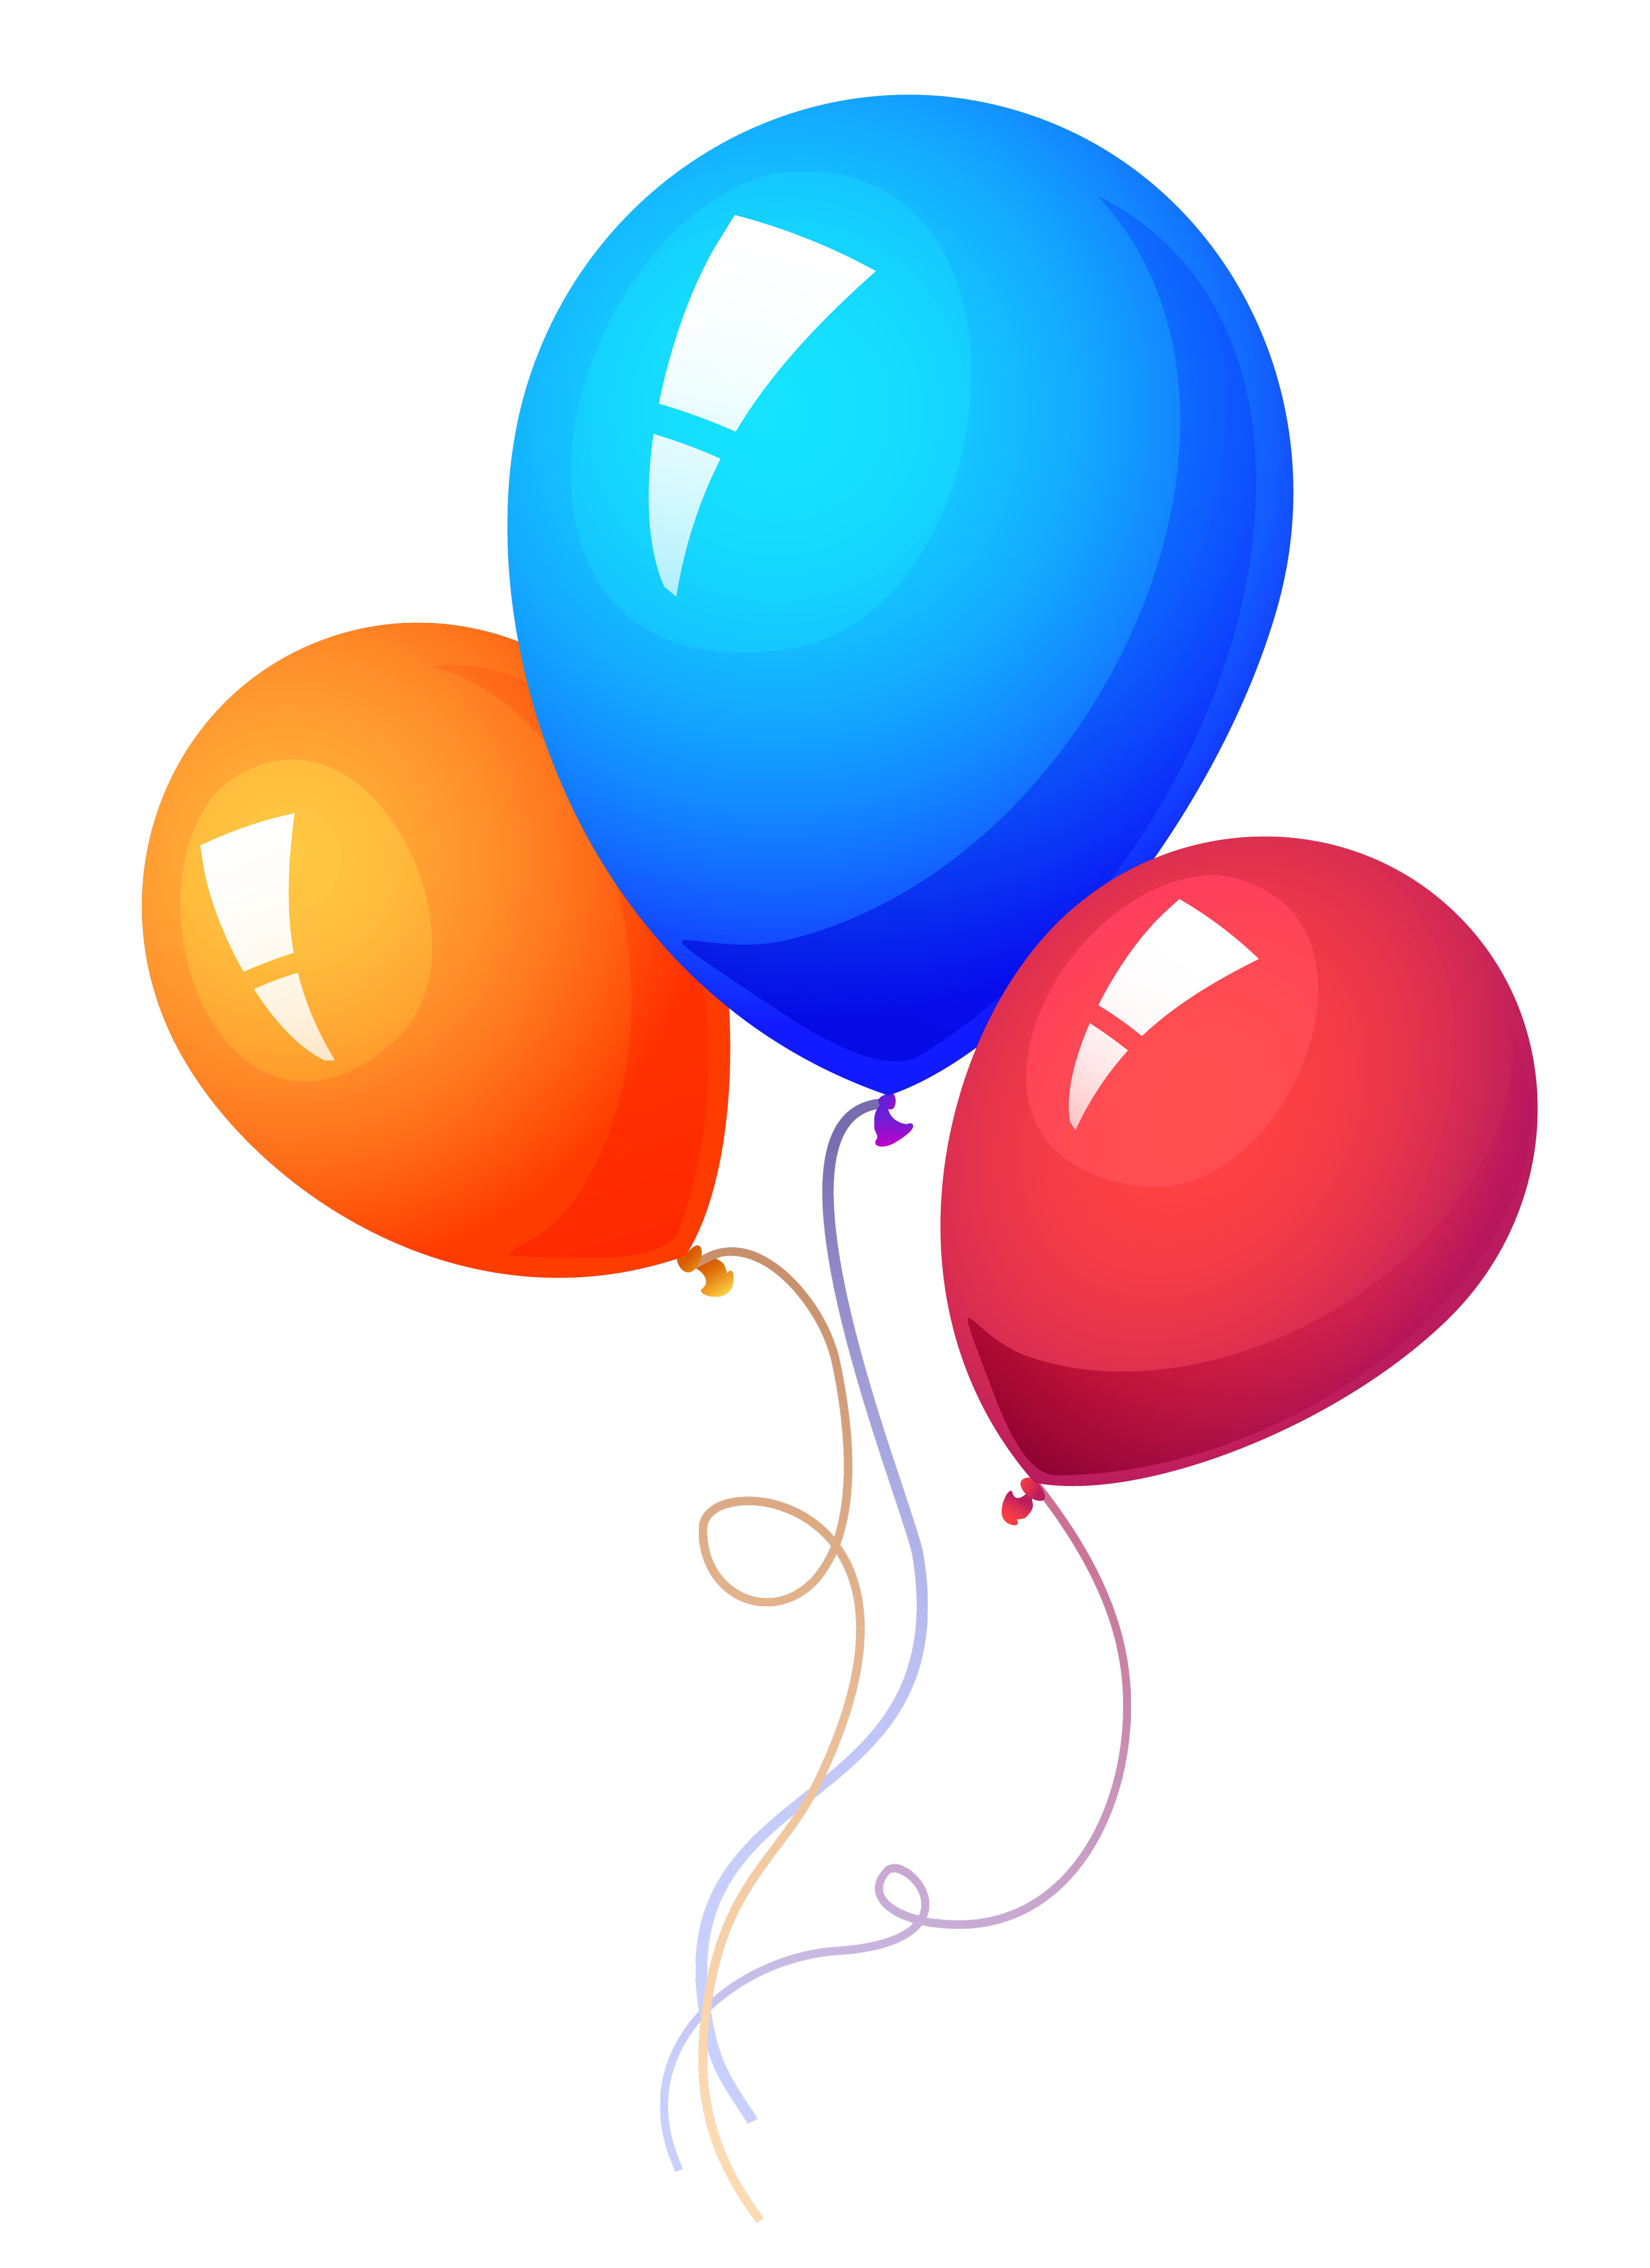 balloons background png